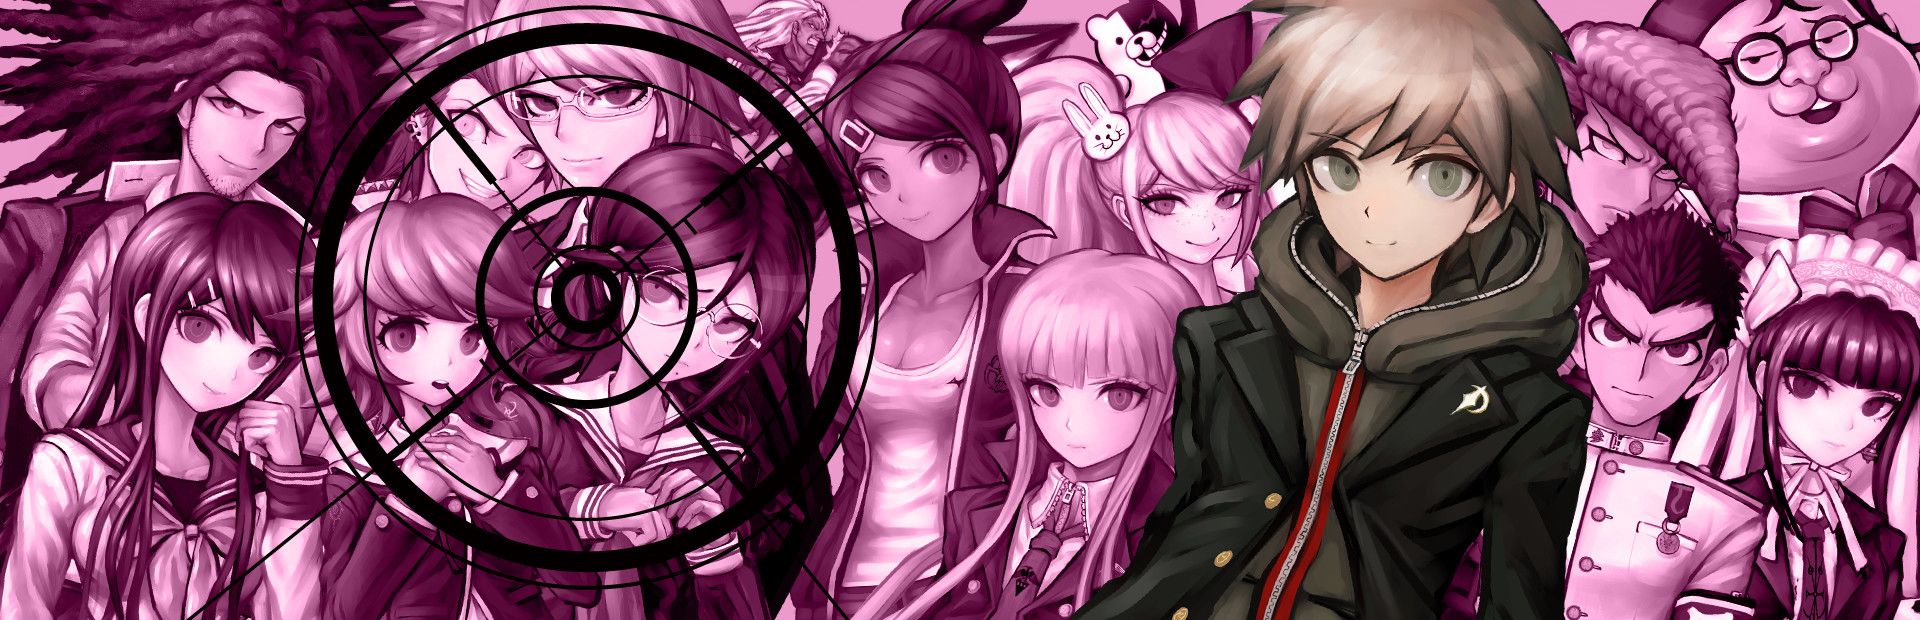 Official ArtworkMakoto Naegi stands in color in front of a violet collage of his classmates, over which is a target.